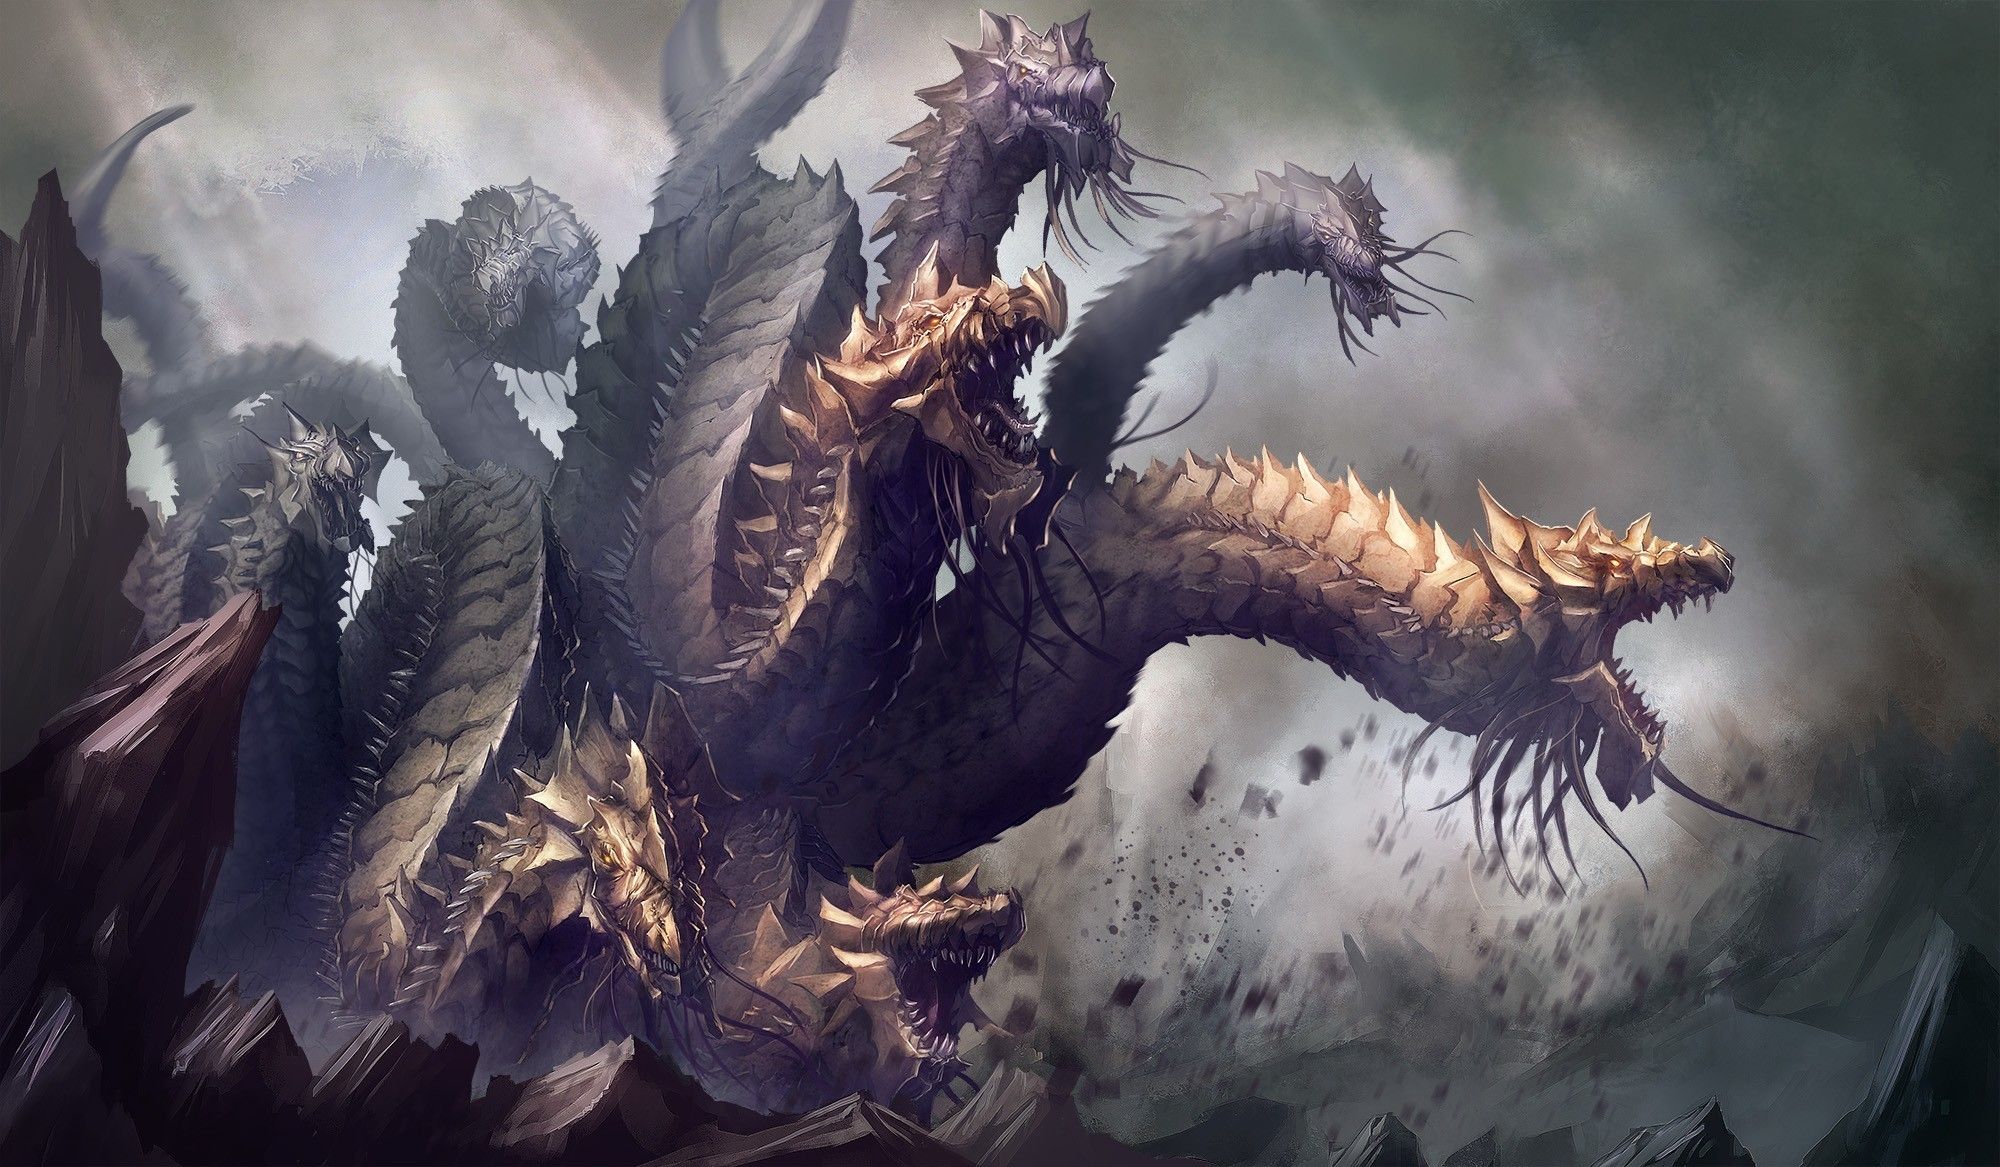 Image of a dragon attacking a group of people. - Greek mythology